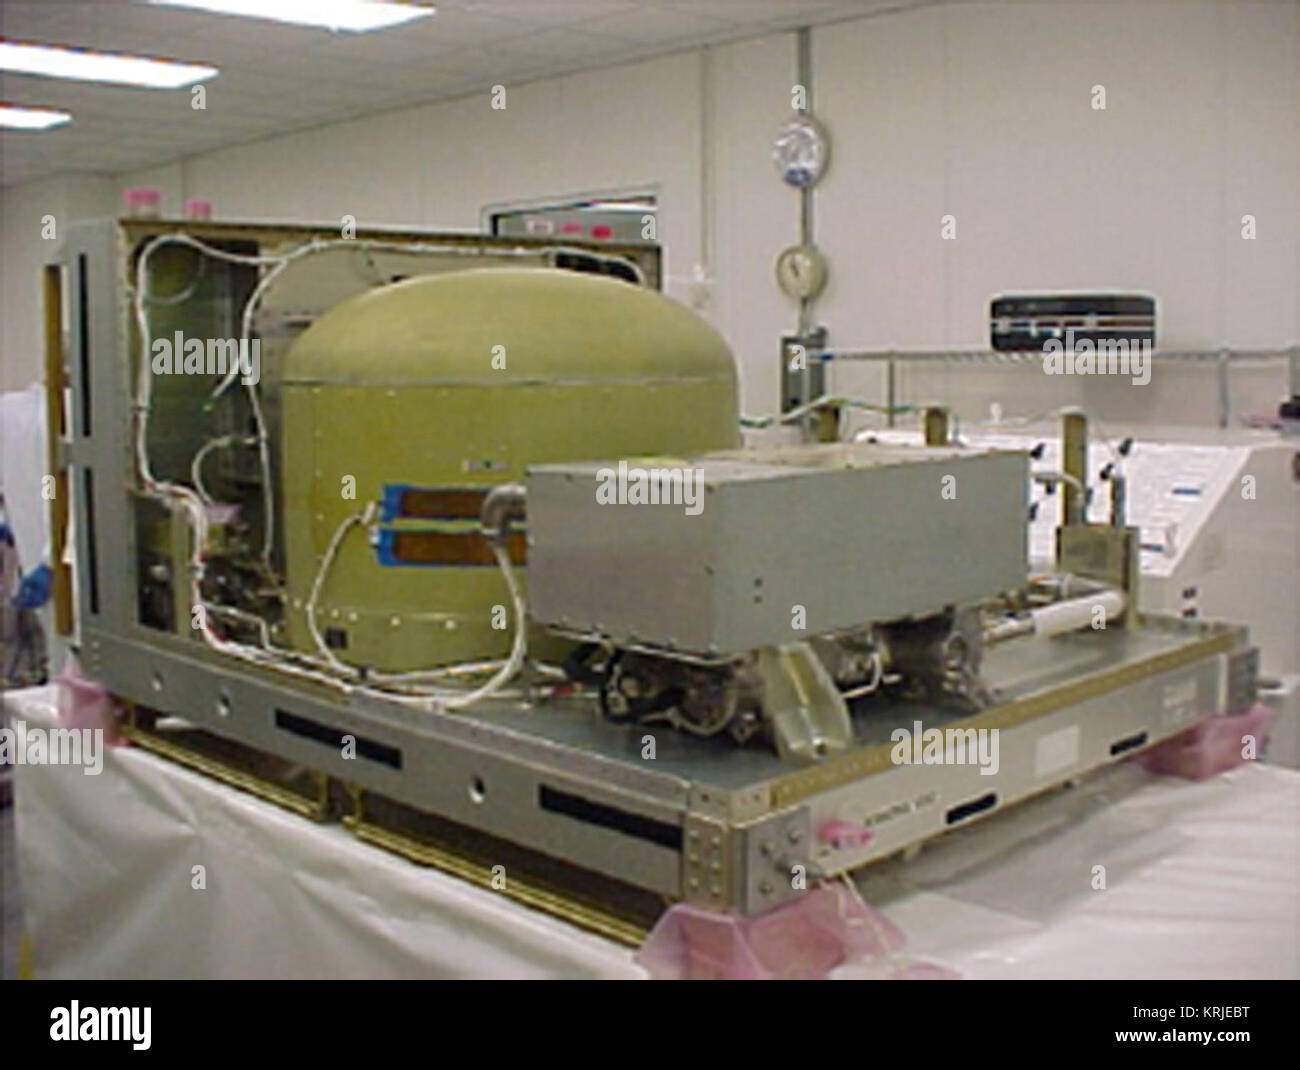 STS-135 A Pump Module with the cover removed Stock Photo